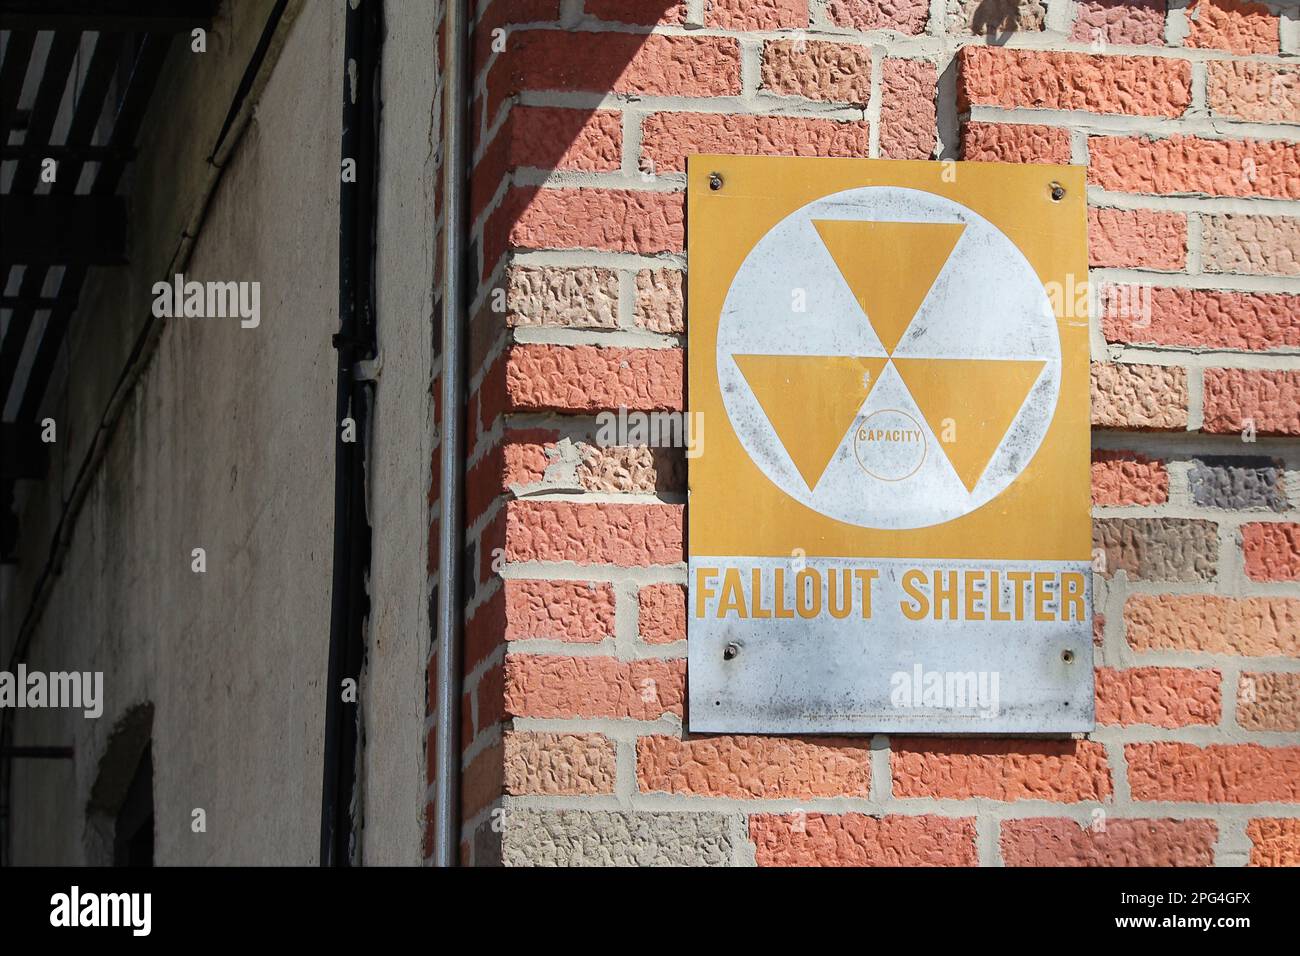 Classic nuclear radiation symbol on New York City building fallout shelter Stock Photo